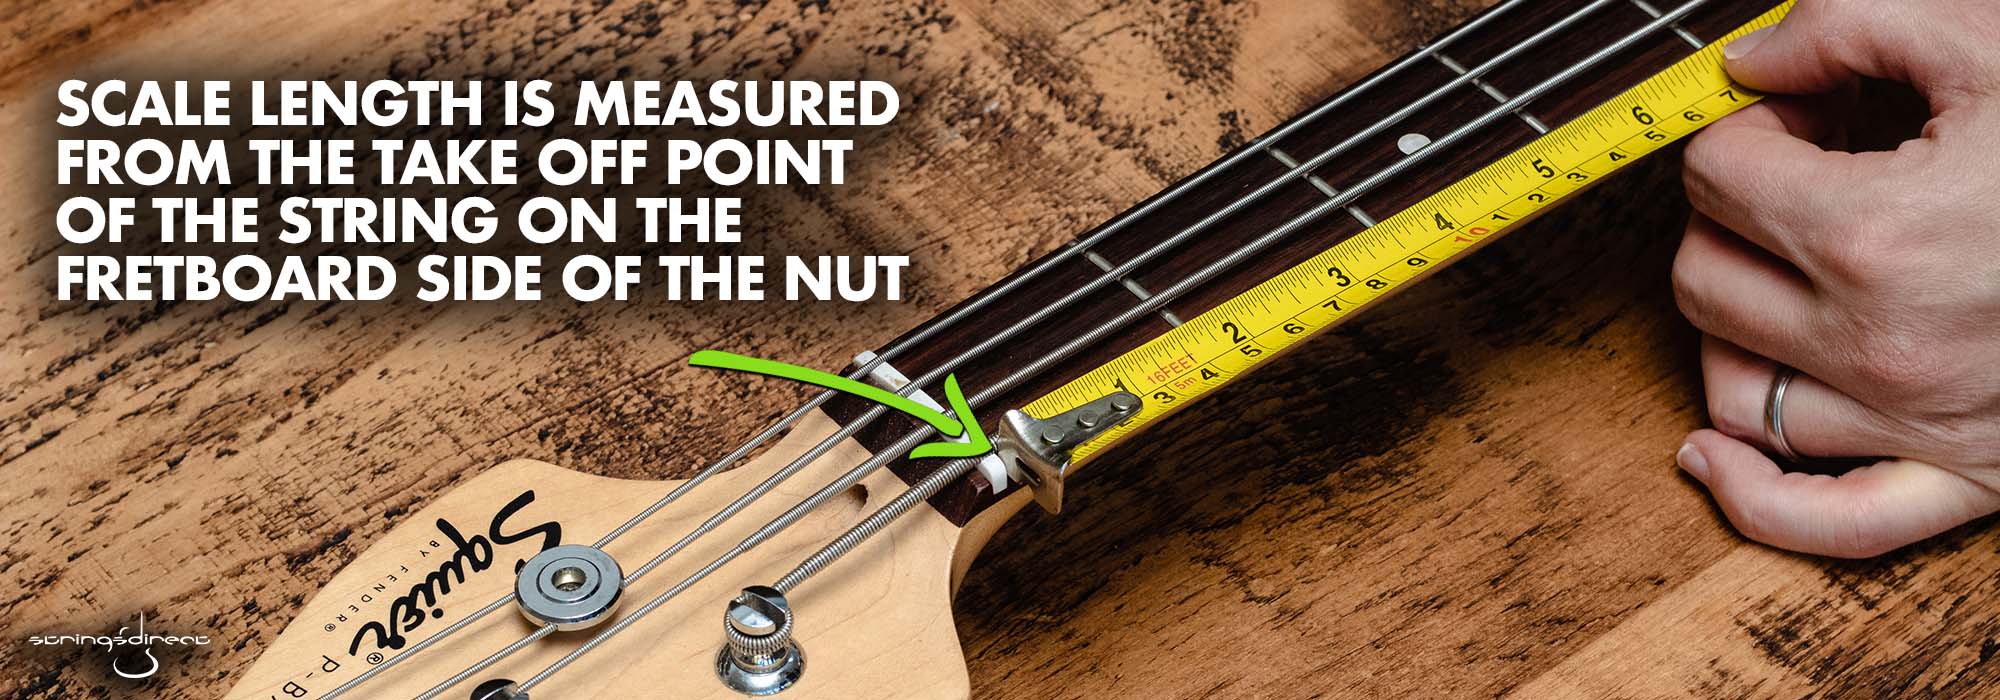 Scale length is measured from the take off point of the string on the fretboard side of the nut